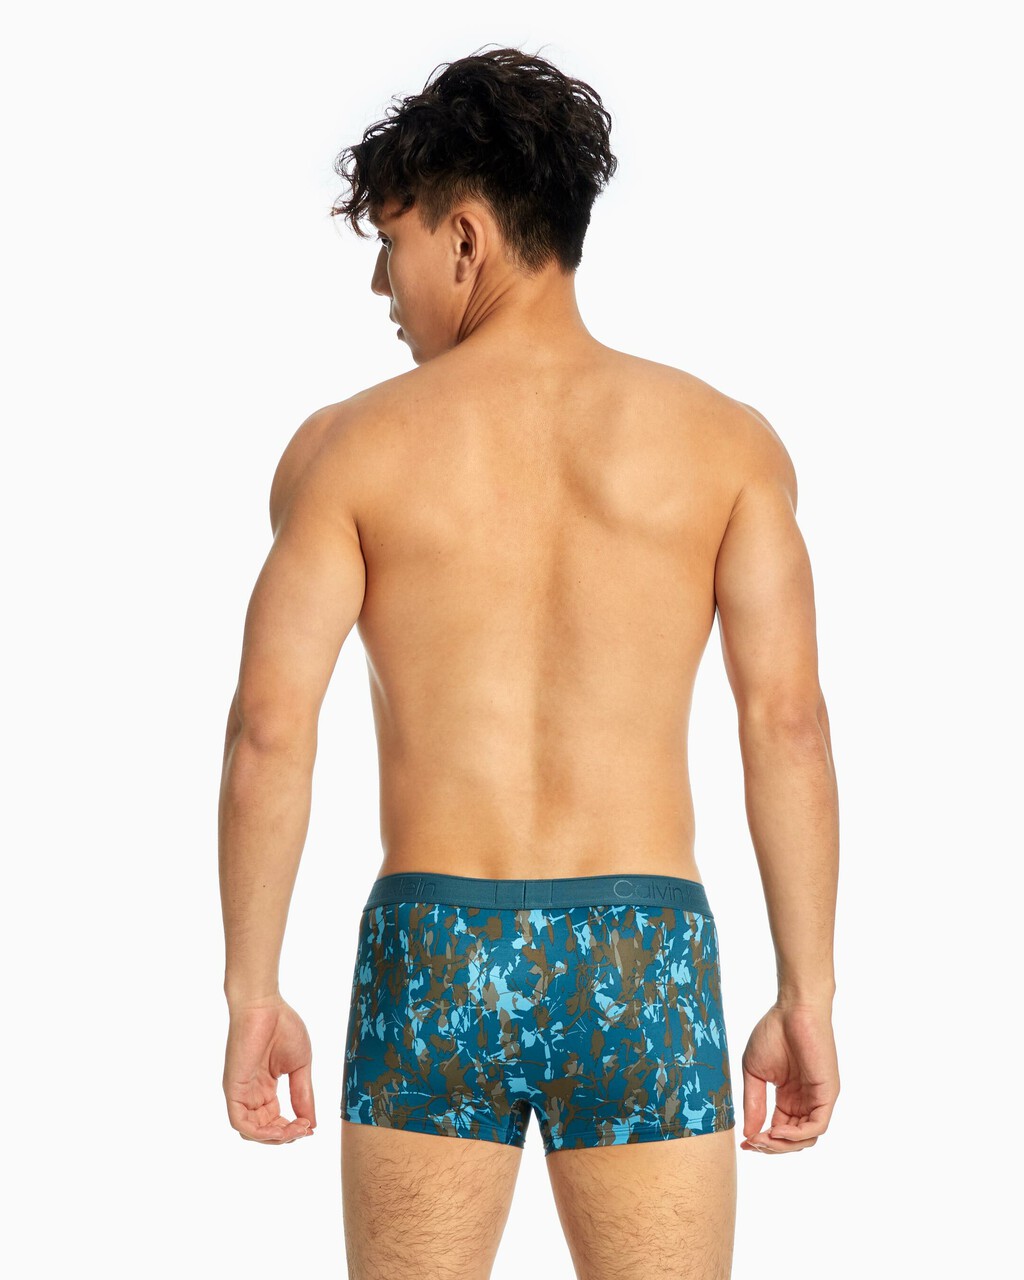 CK BLACK MICRO LOW RISE TRUNK, MIRROR FLORAL SUGARY BLUE, hi-res